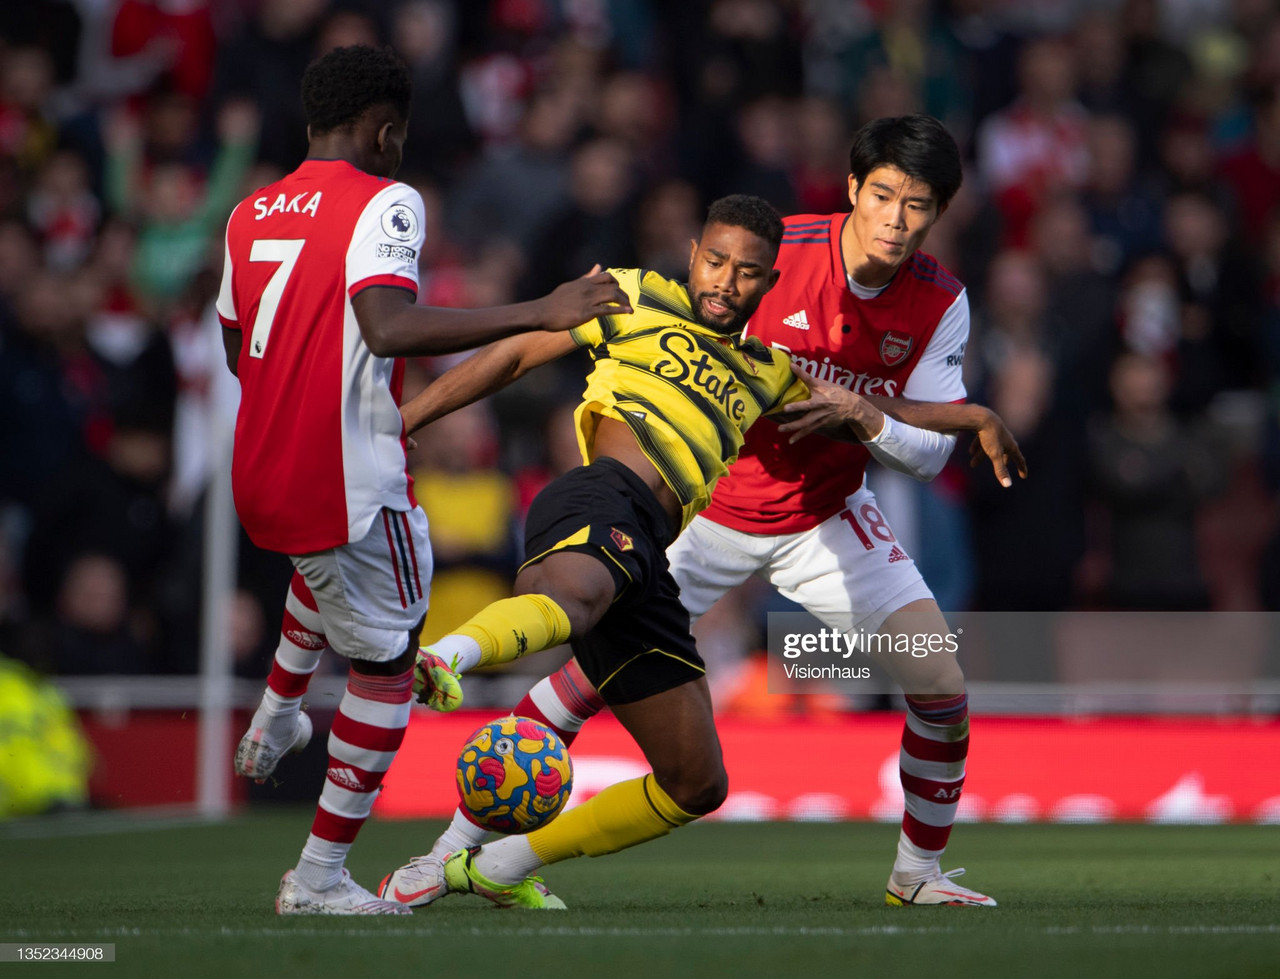 Watford v Arsenal preview: How to watch, kick off time, predicted lineups and ones to watch